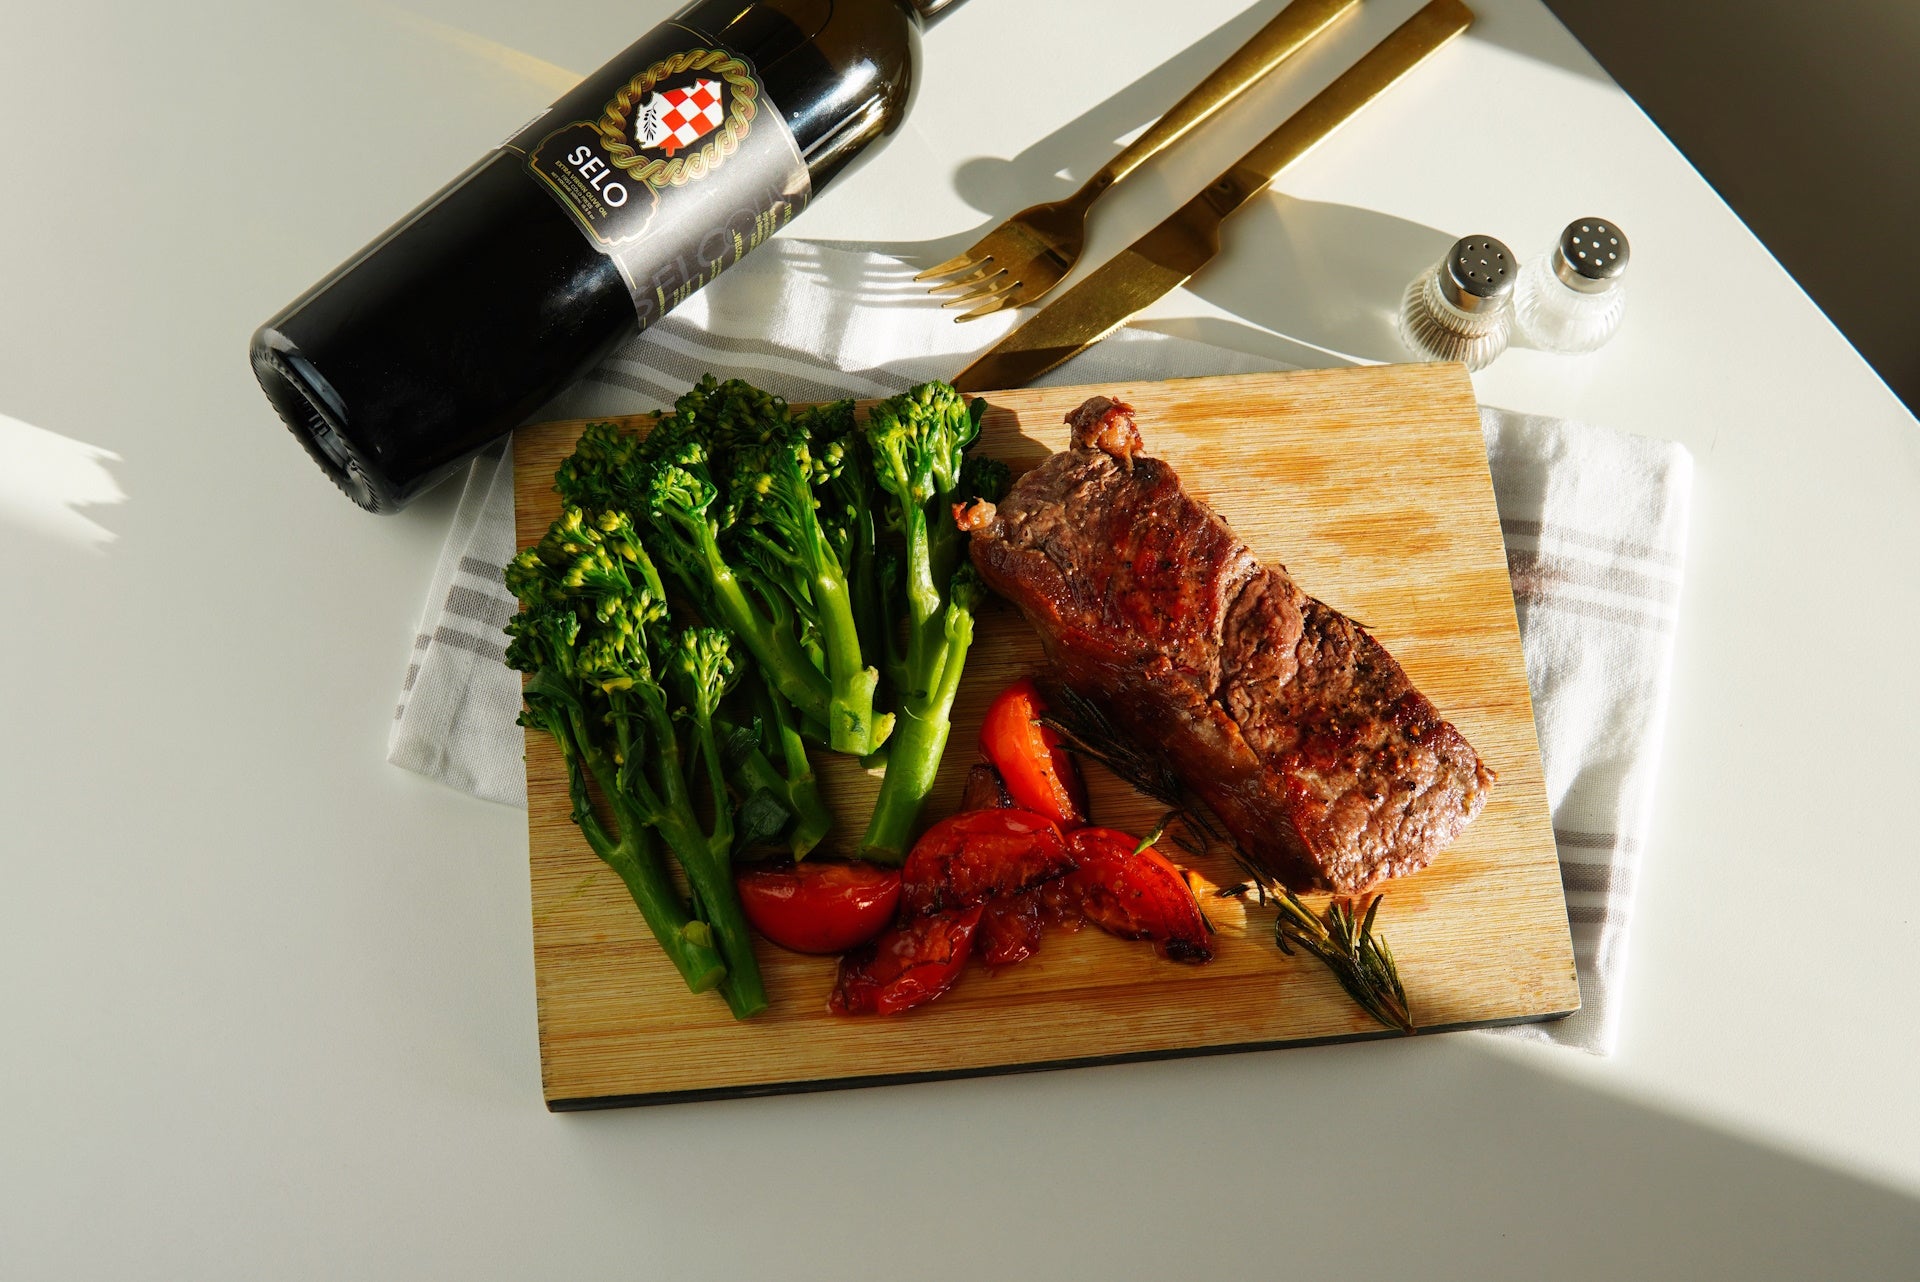 Juicy steak cooked to perfection, finished with a generous glaze of Croatian olive oil for extra richness.